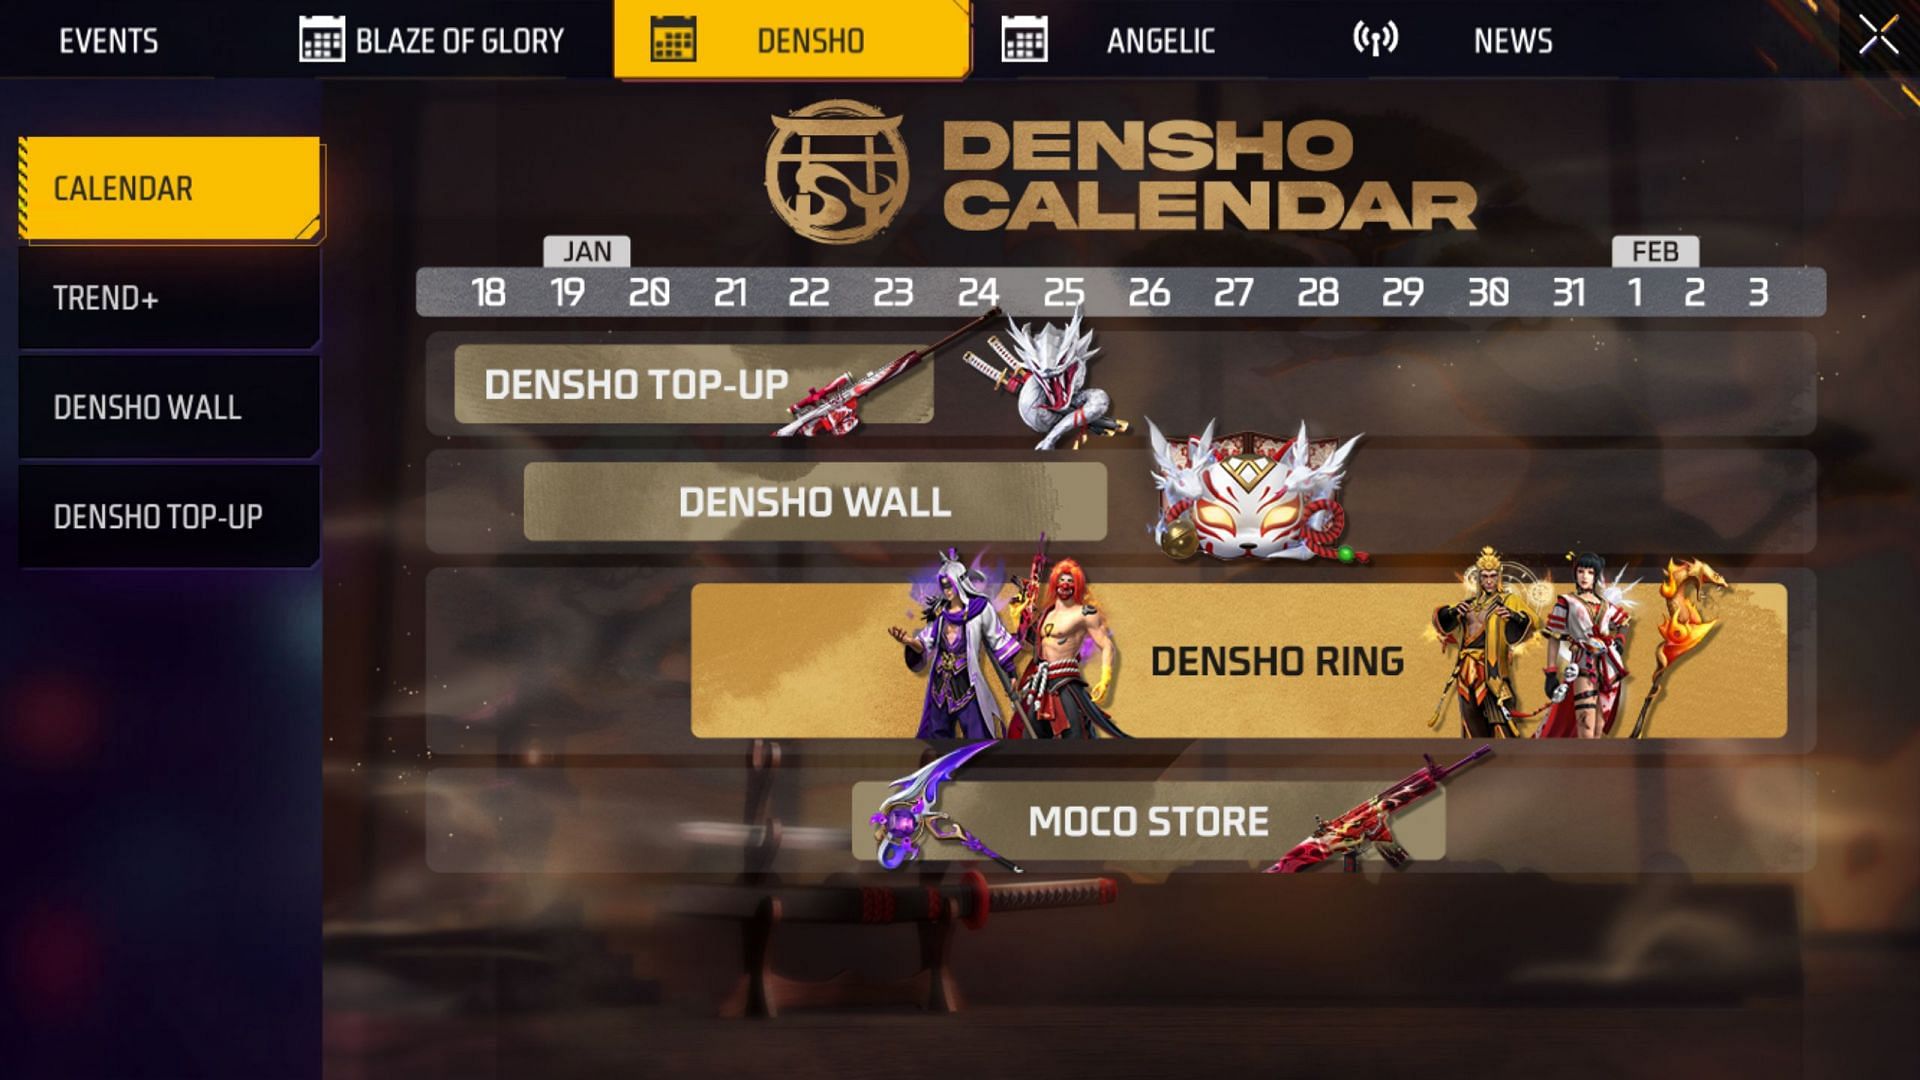 Select the Densho Wall event from the available options on the left (Image via Garena)